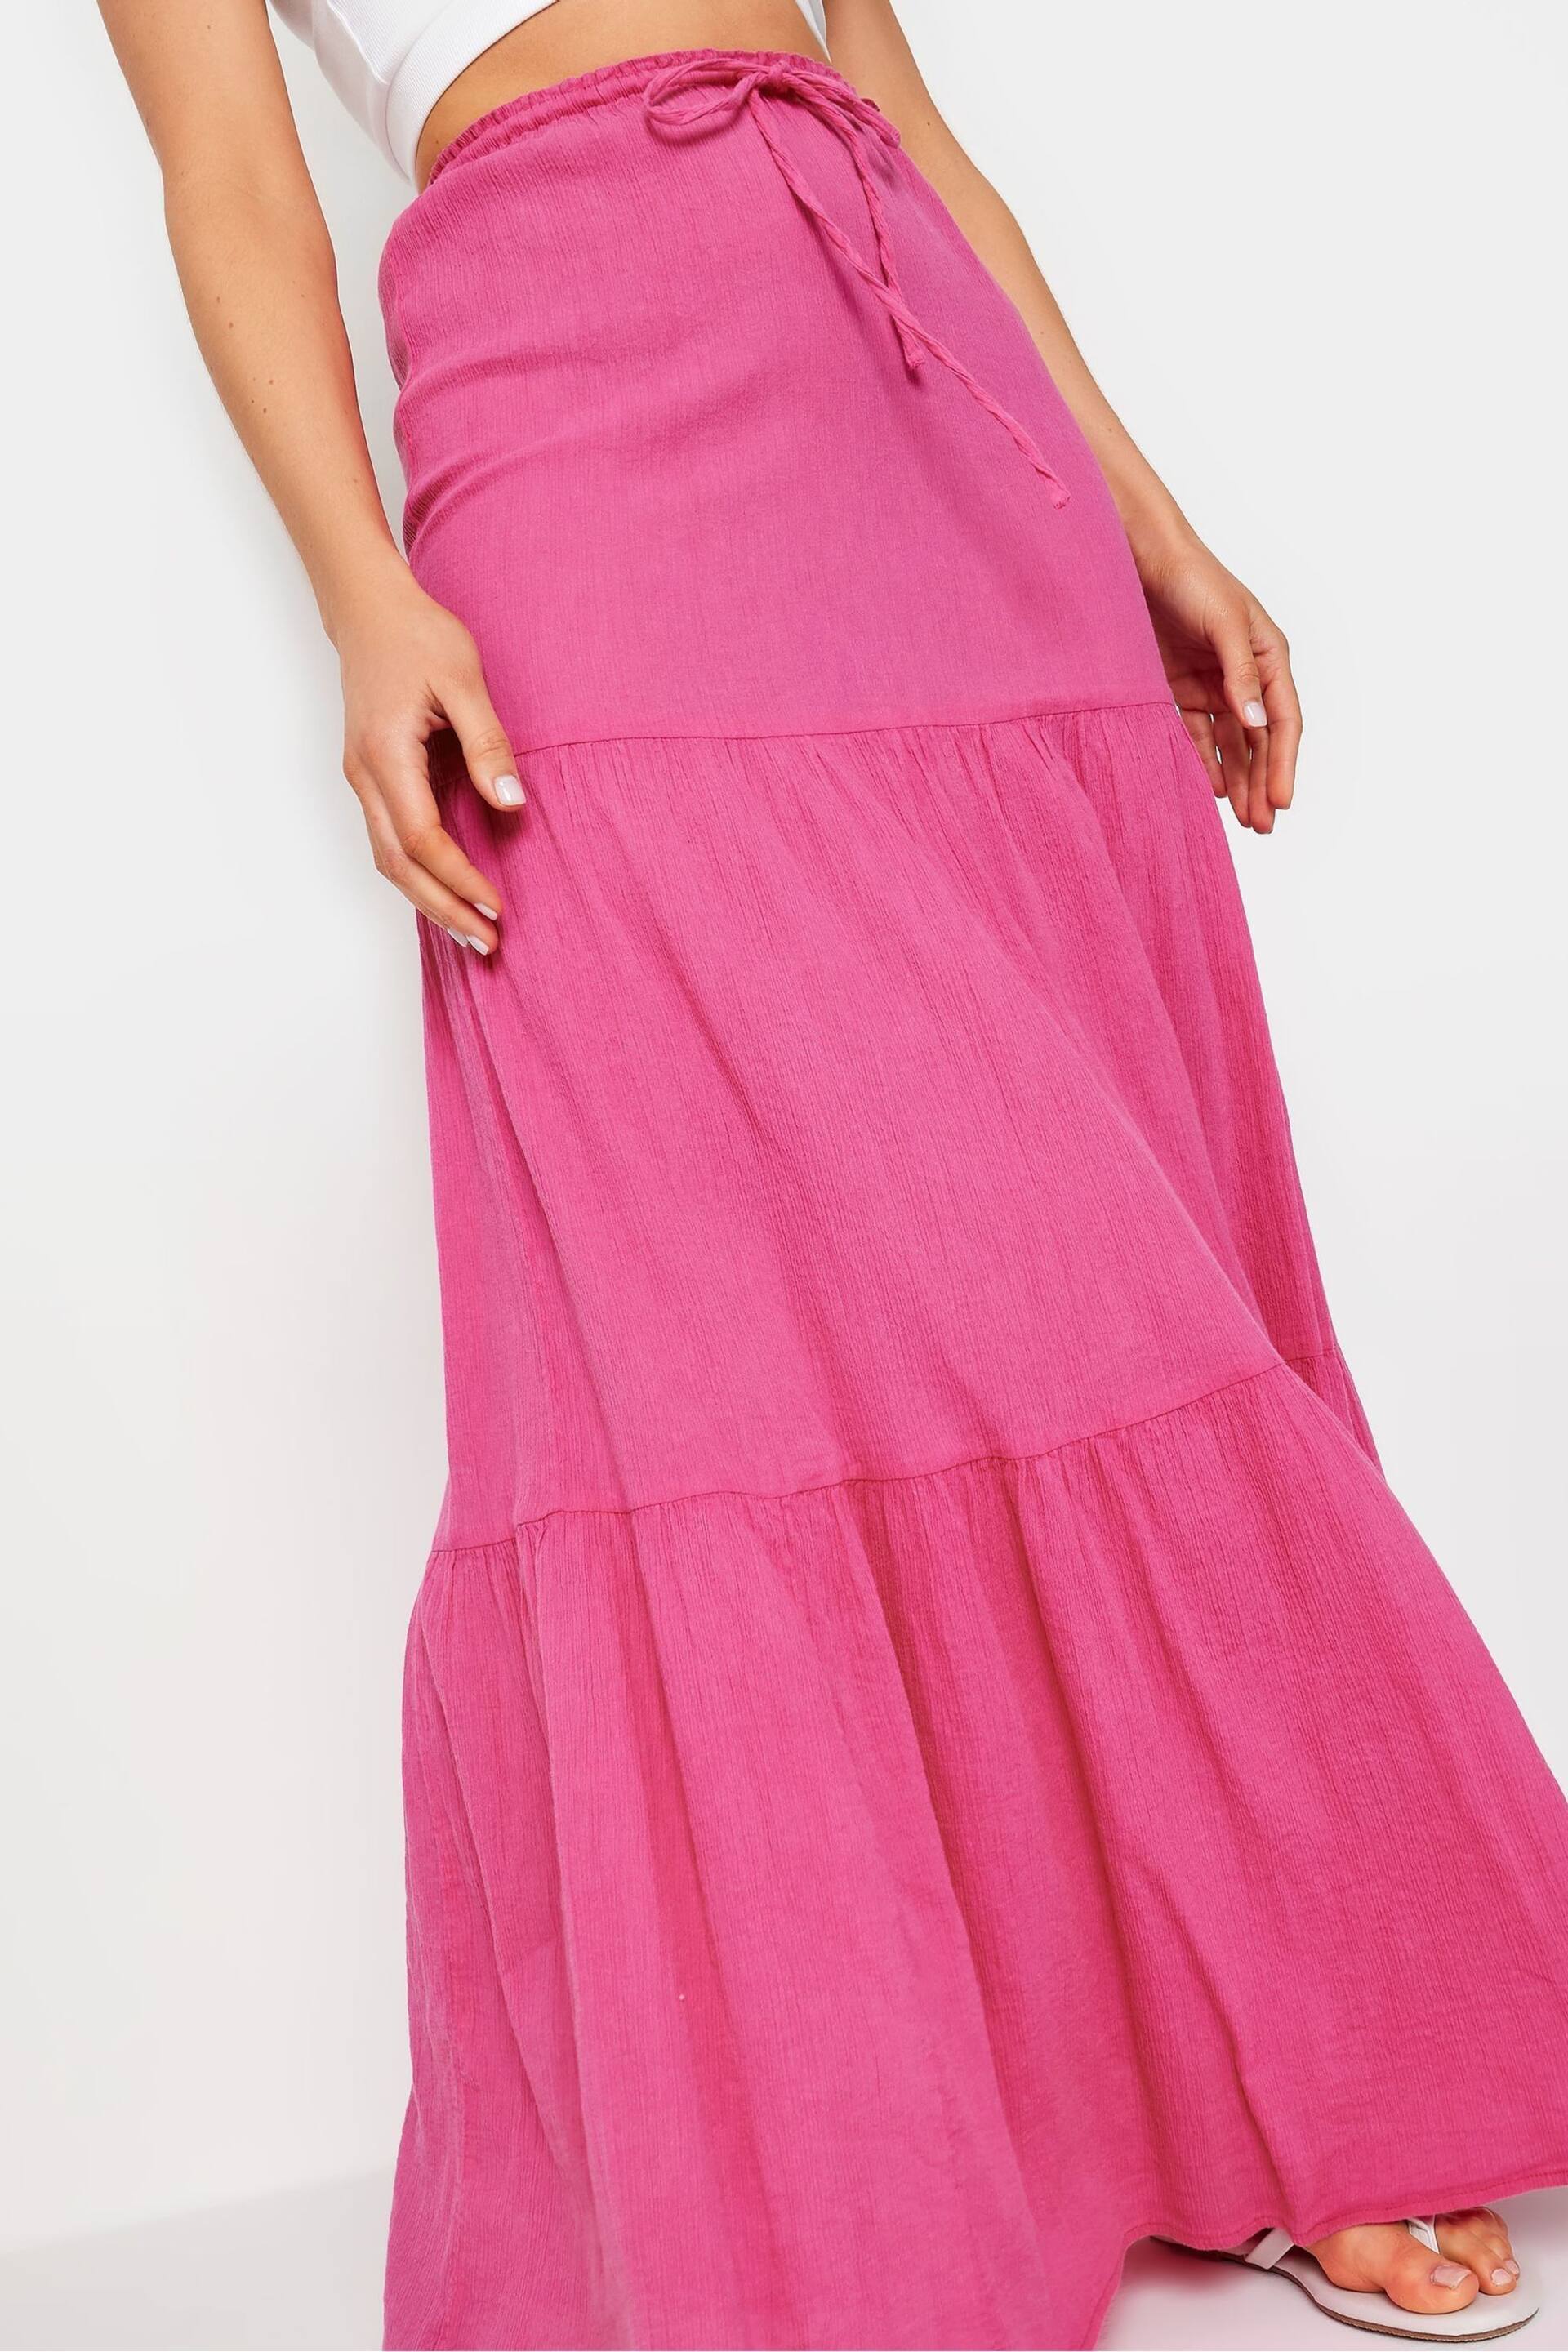 Long Tall Sally Pink Acid Wash Tiered Maxi Skirt - Image 4 of 4